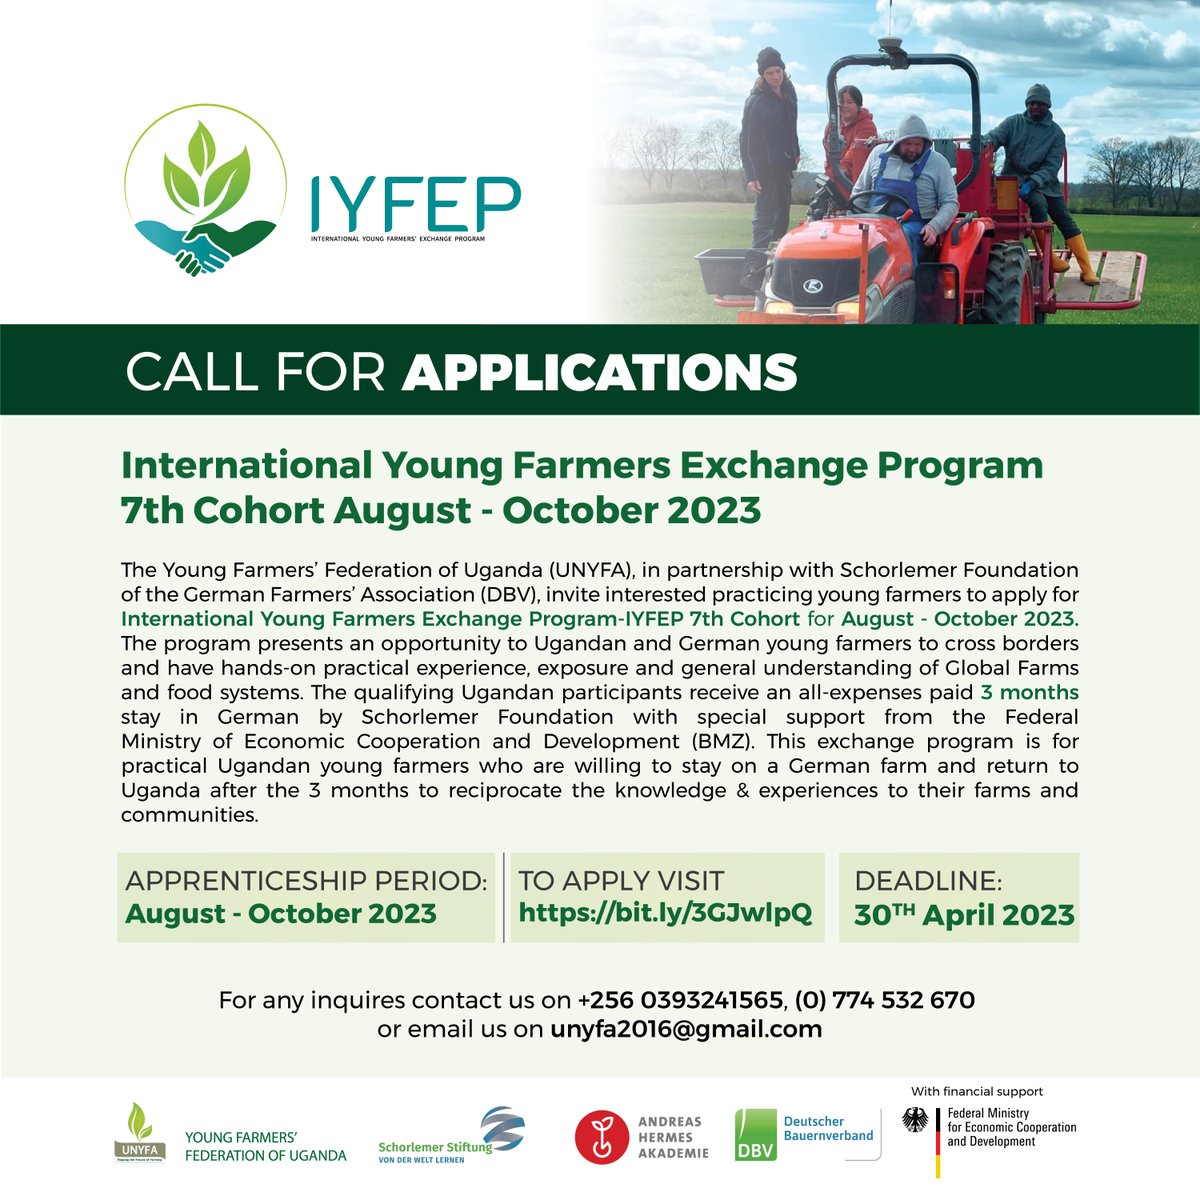 Join the 7th cohort of the International Young Farmers Exchange program and learn from experienced farmers in Germany while sharing your own knowledge of farming practices in Uganda. Apply now and take your farming skills to the next level!
🔗bit.ly/3GJwlpQ  #IYFEP